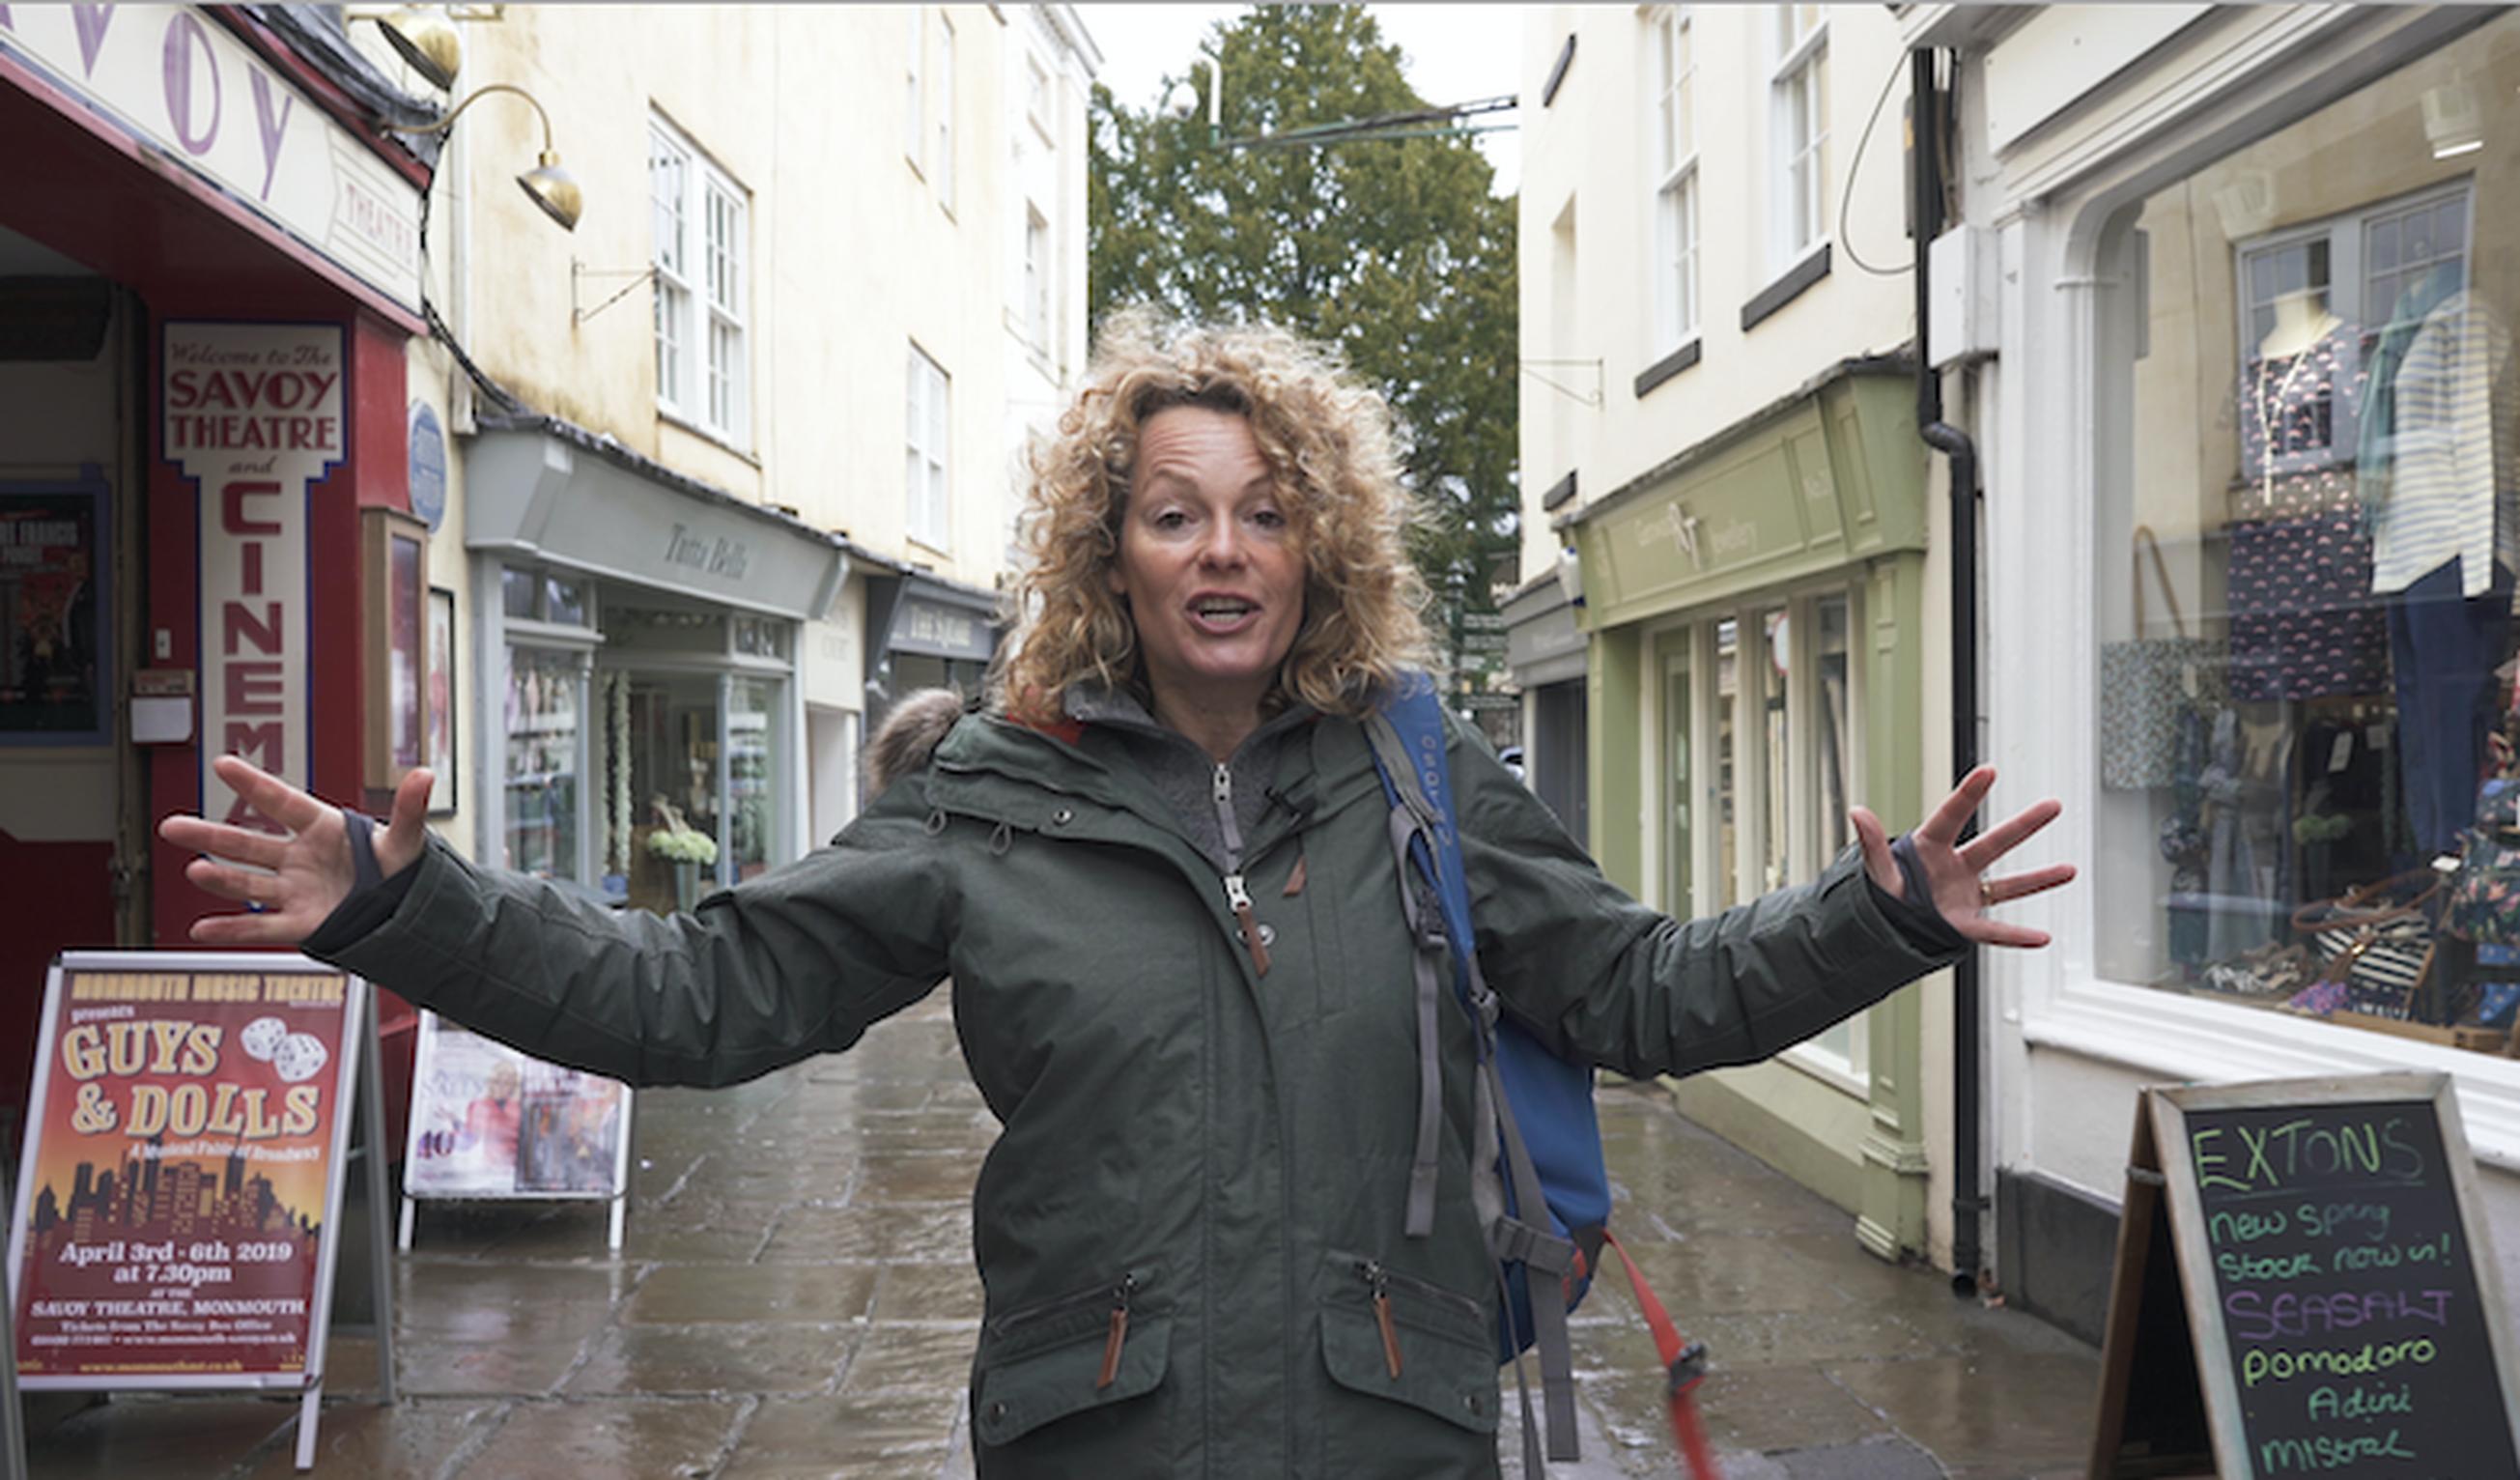 Kate Humble, television presenter and author, is promoting the campaign. “Walking doesn’t have to be about climbing mountains; you can get just as much from a walk around your local town,” she said. “What does make a difference is having a town which feels safe to walk in – whether you’re nine or 90. If your pavements are a bit cracked, you’re worried about tripping or you don’t have enough benches or good lighting, visit the Living Streets website for information on how you can help improve your local area.”